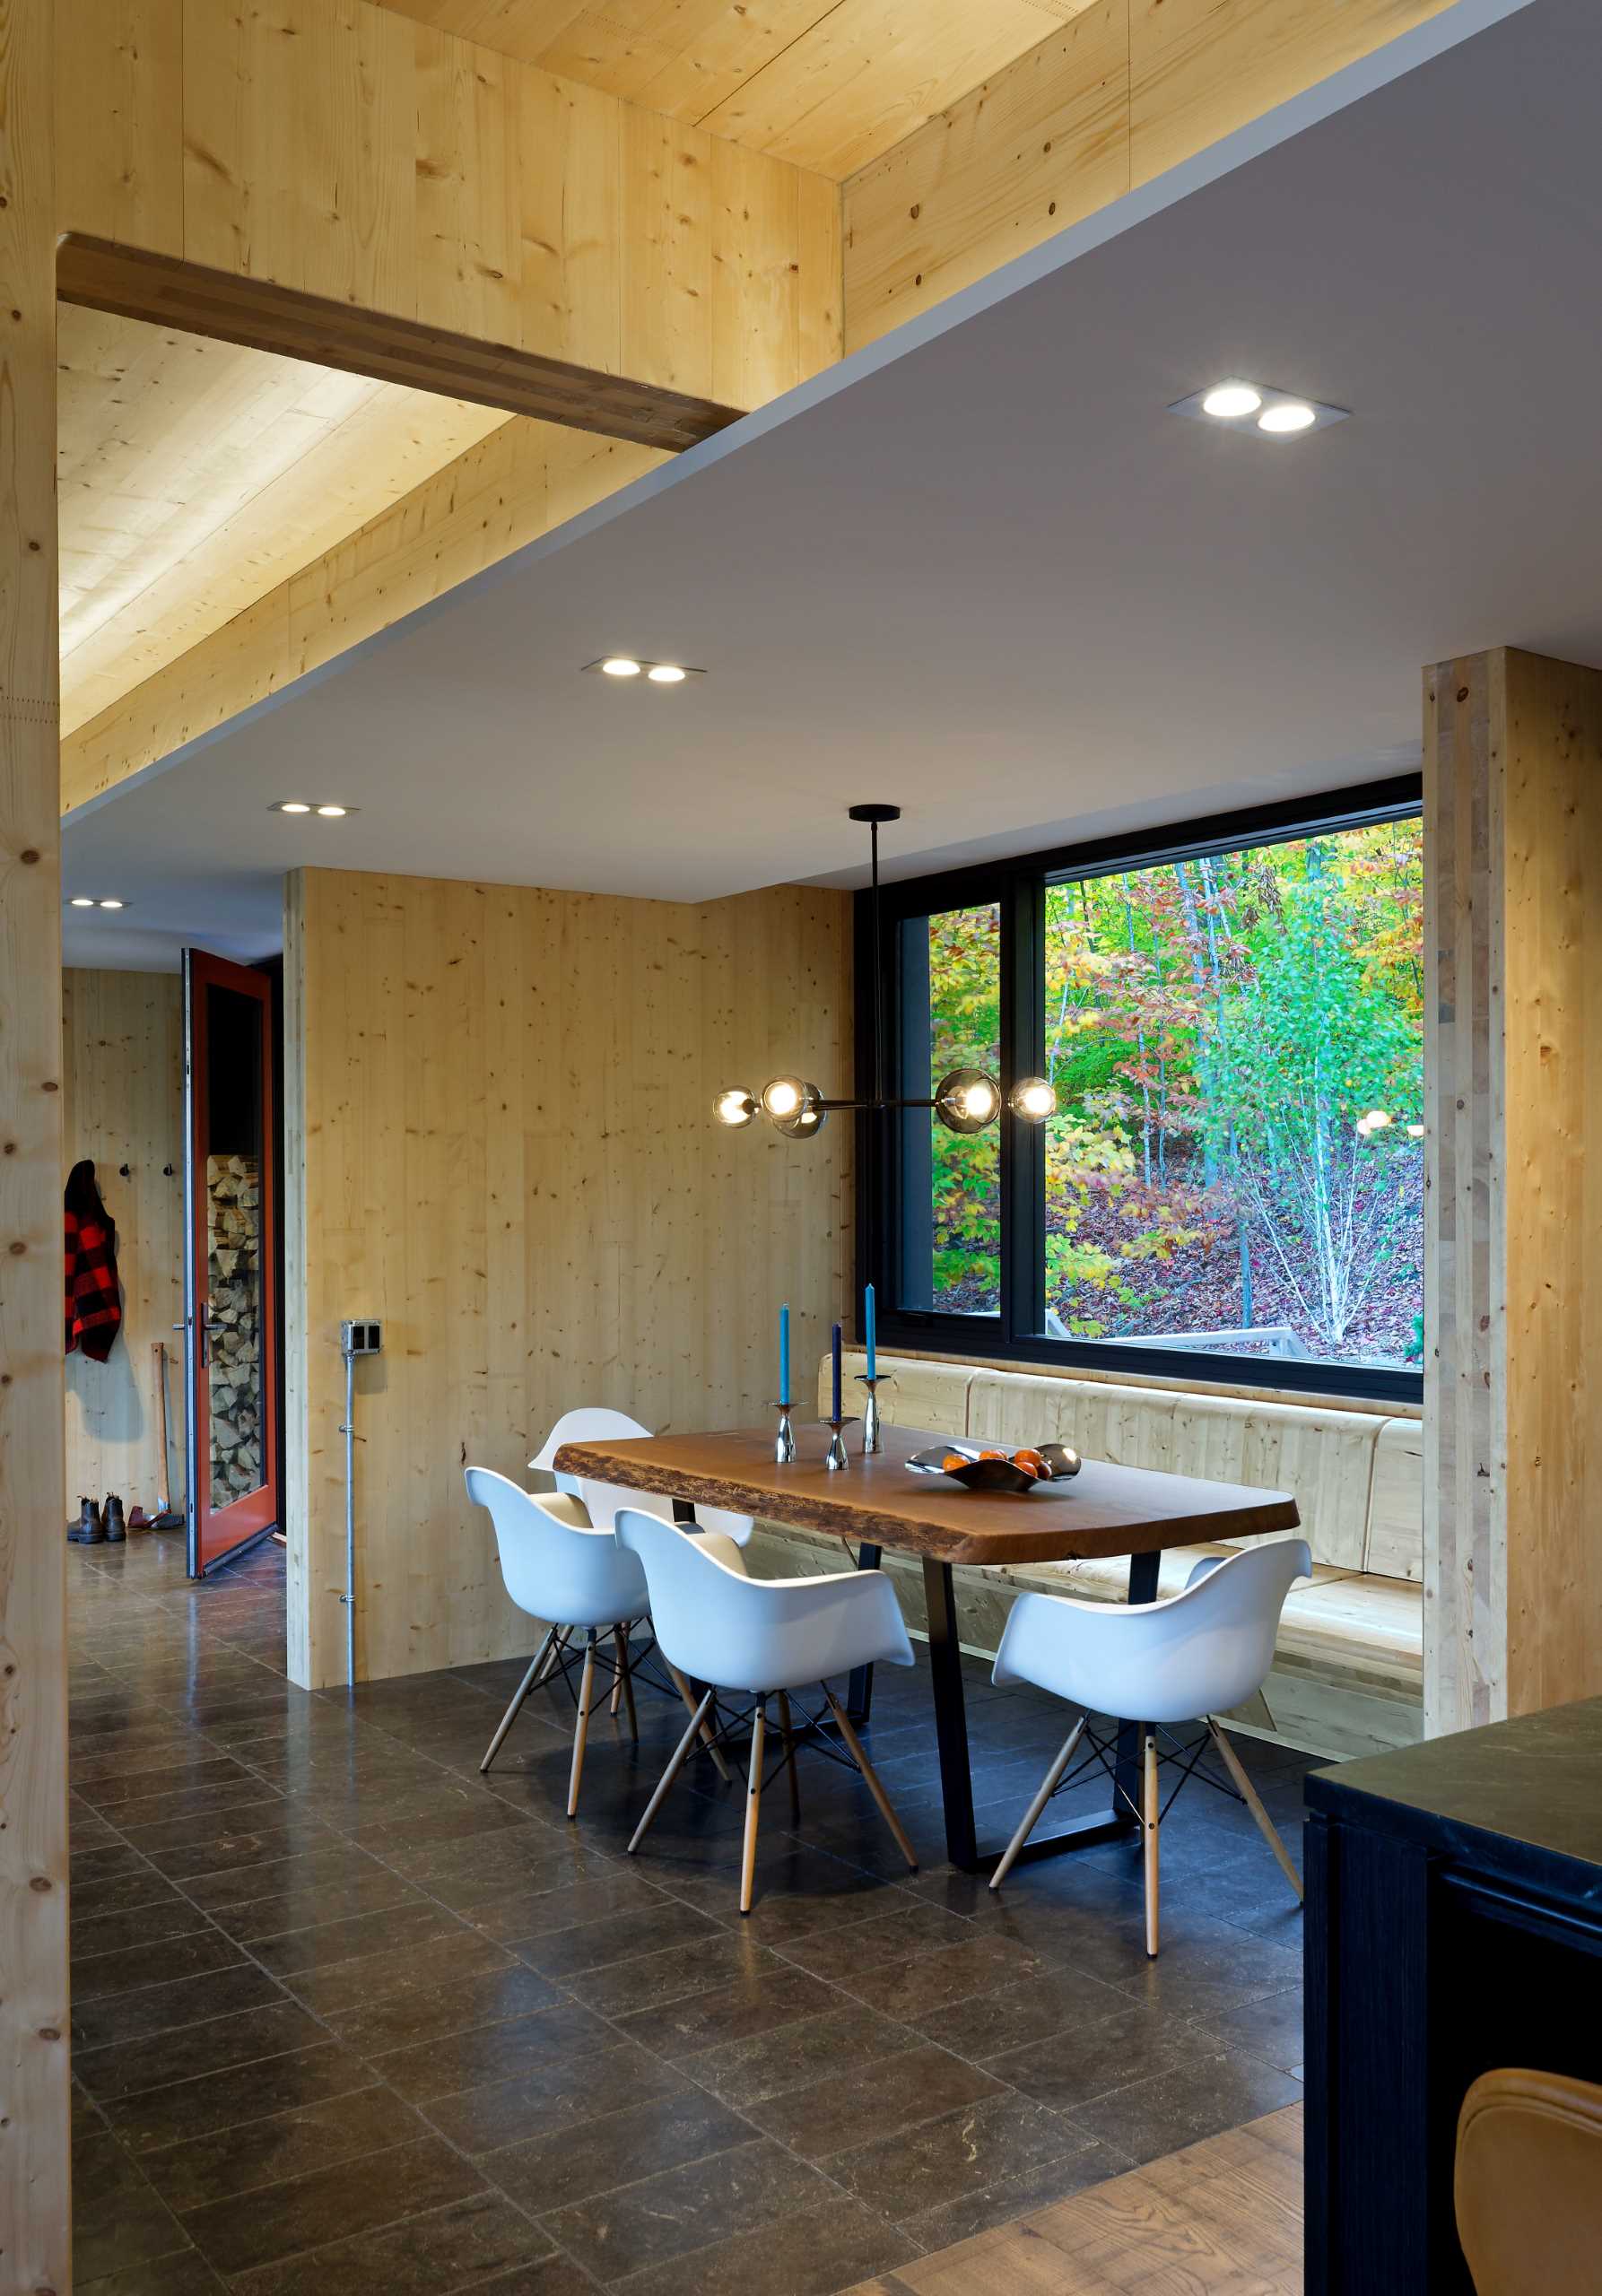 A contemporary dining area with a built-in banquette and large window.